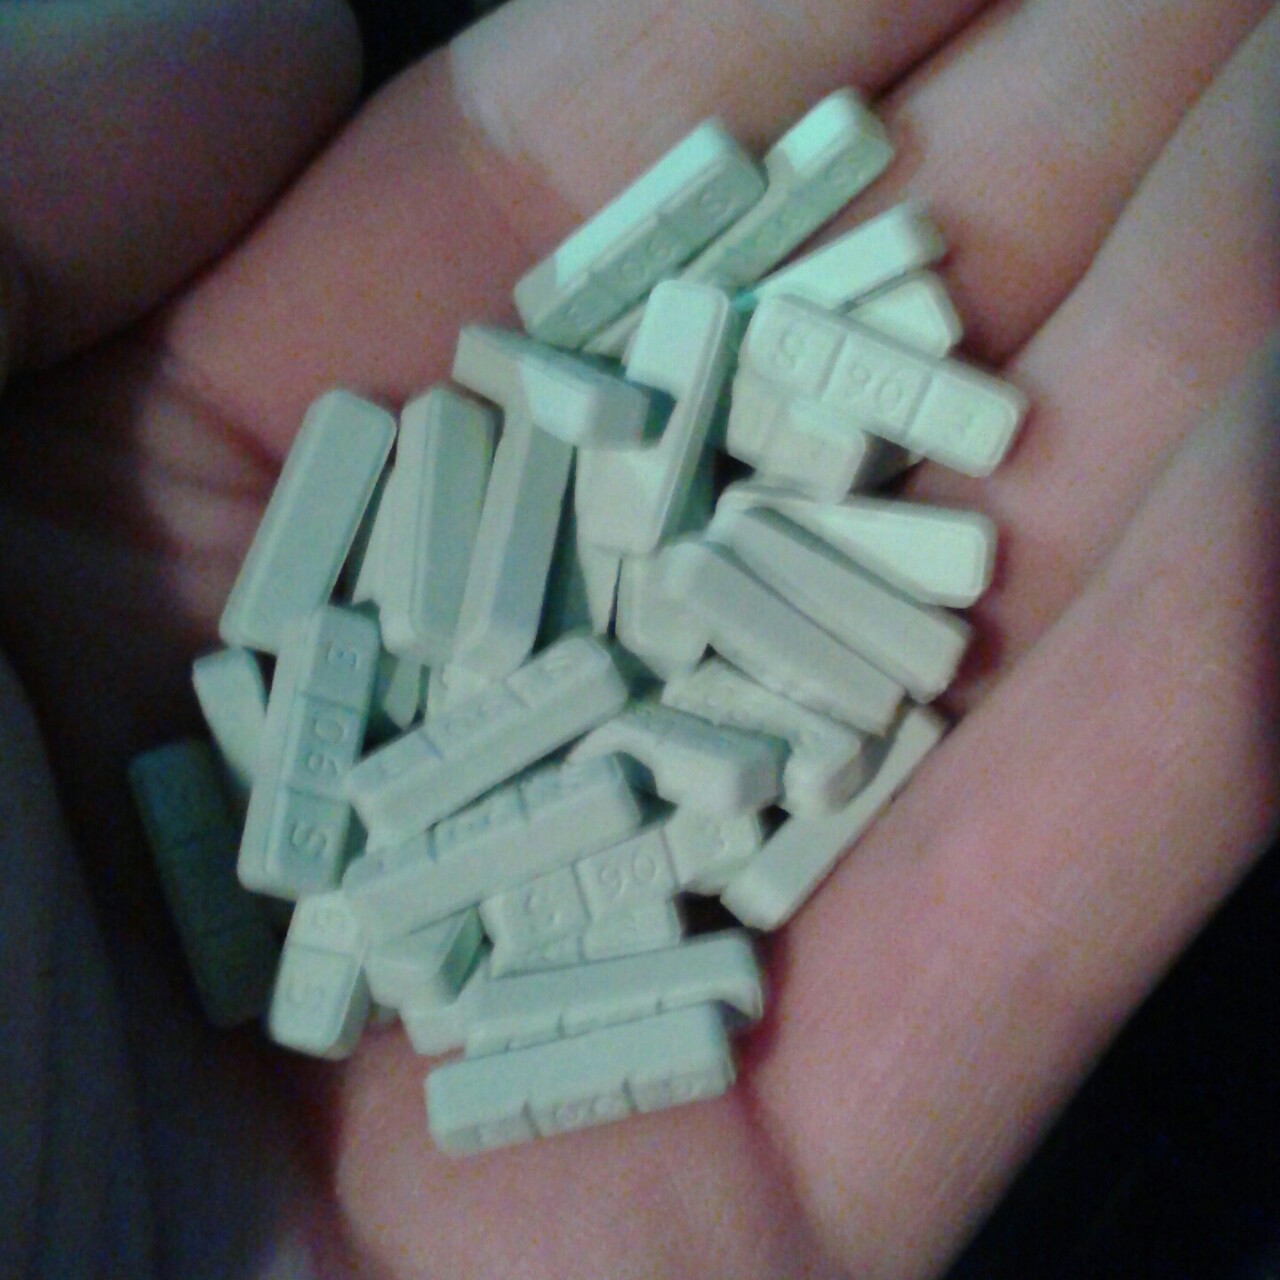 WHAT IS XANAX BARS USED FOR